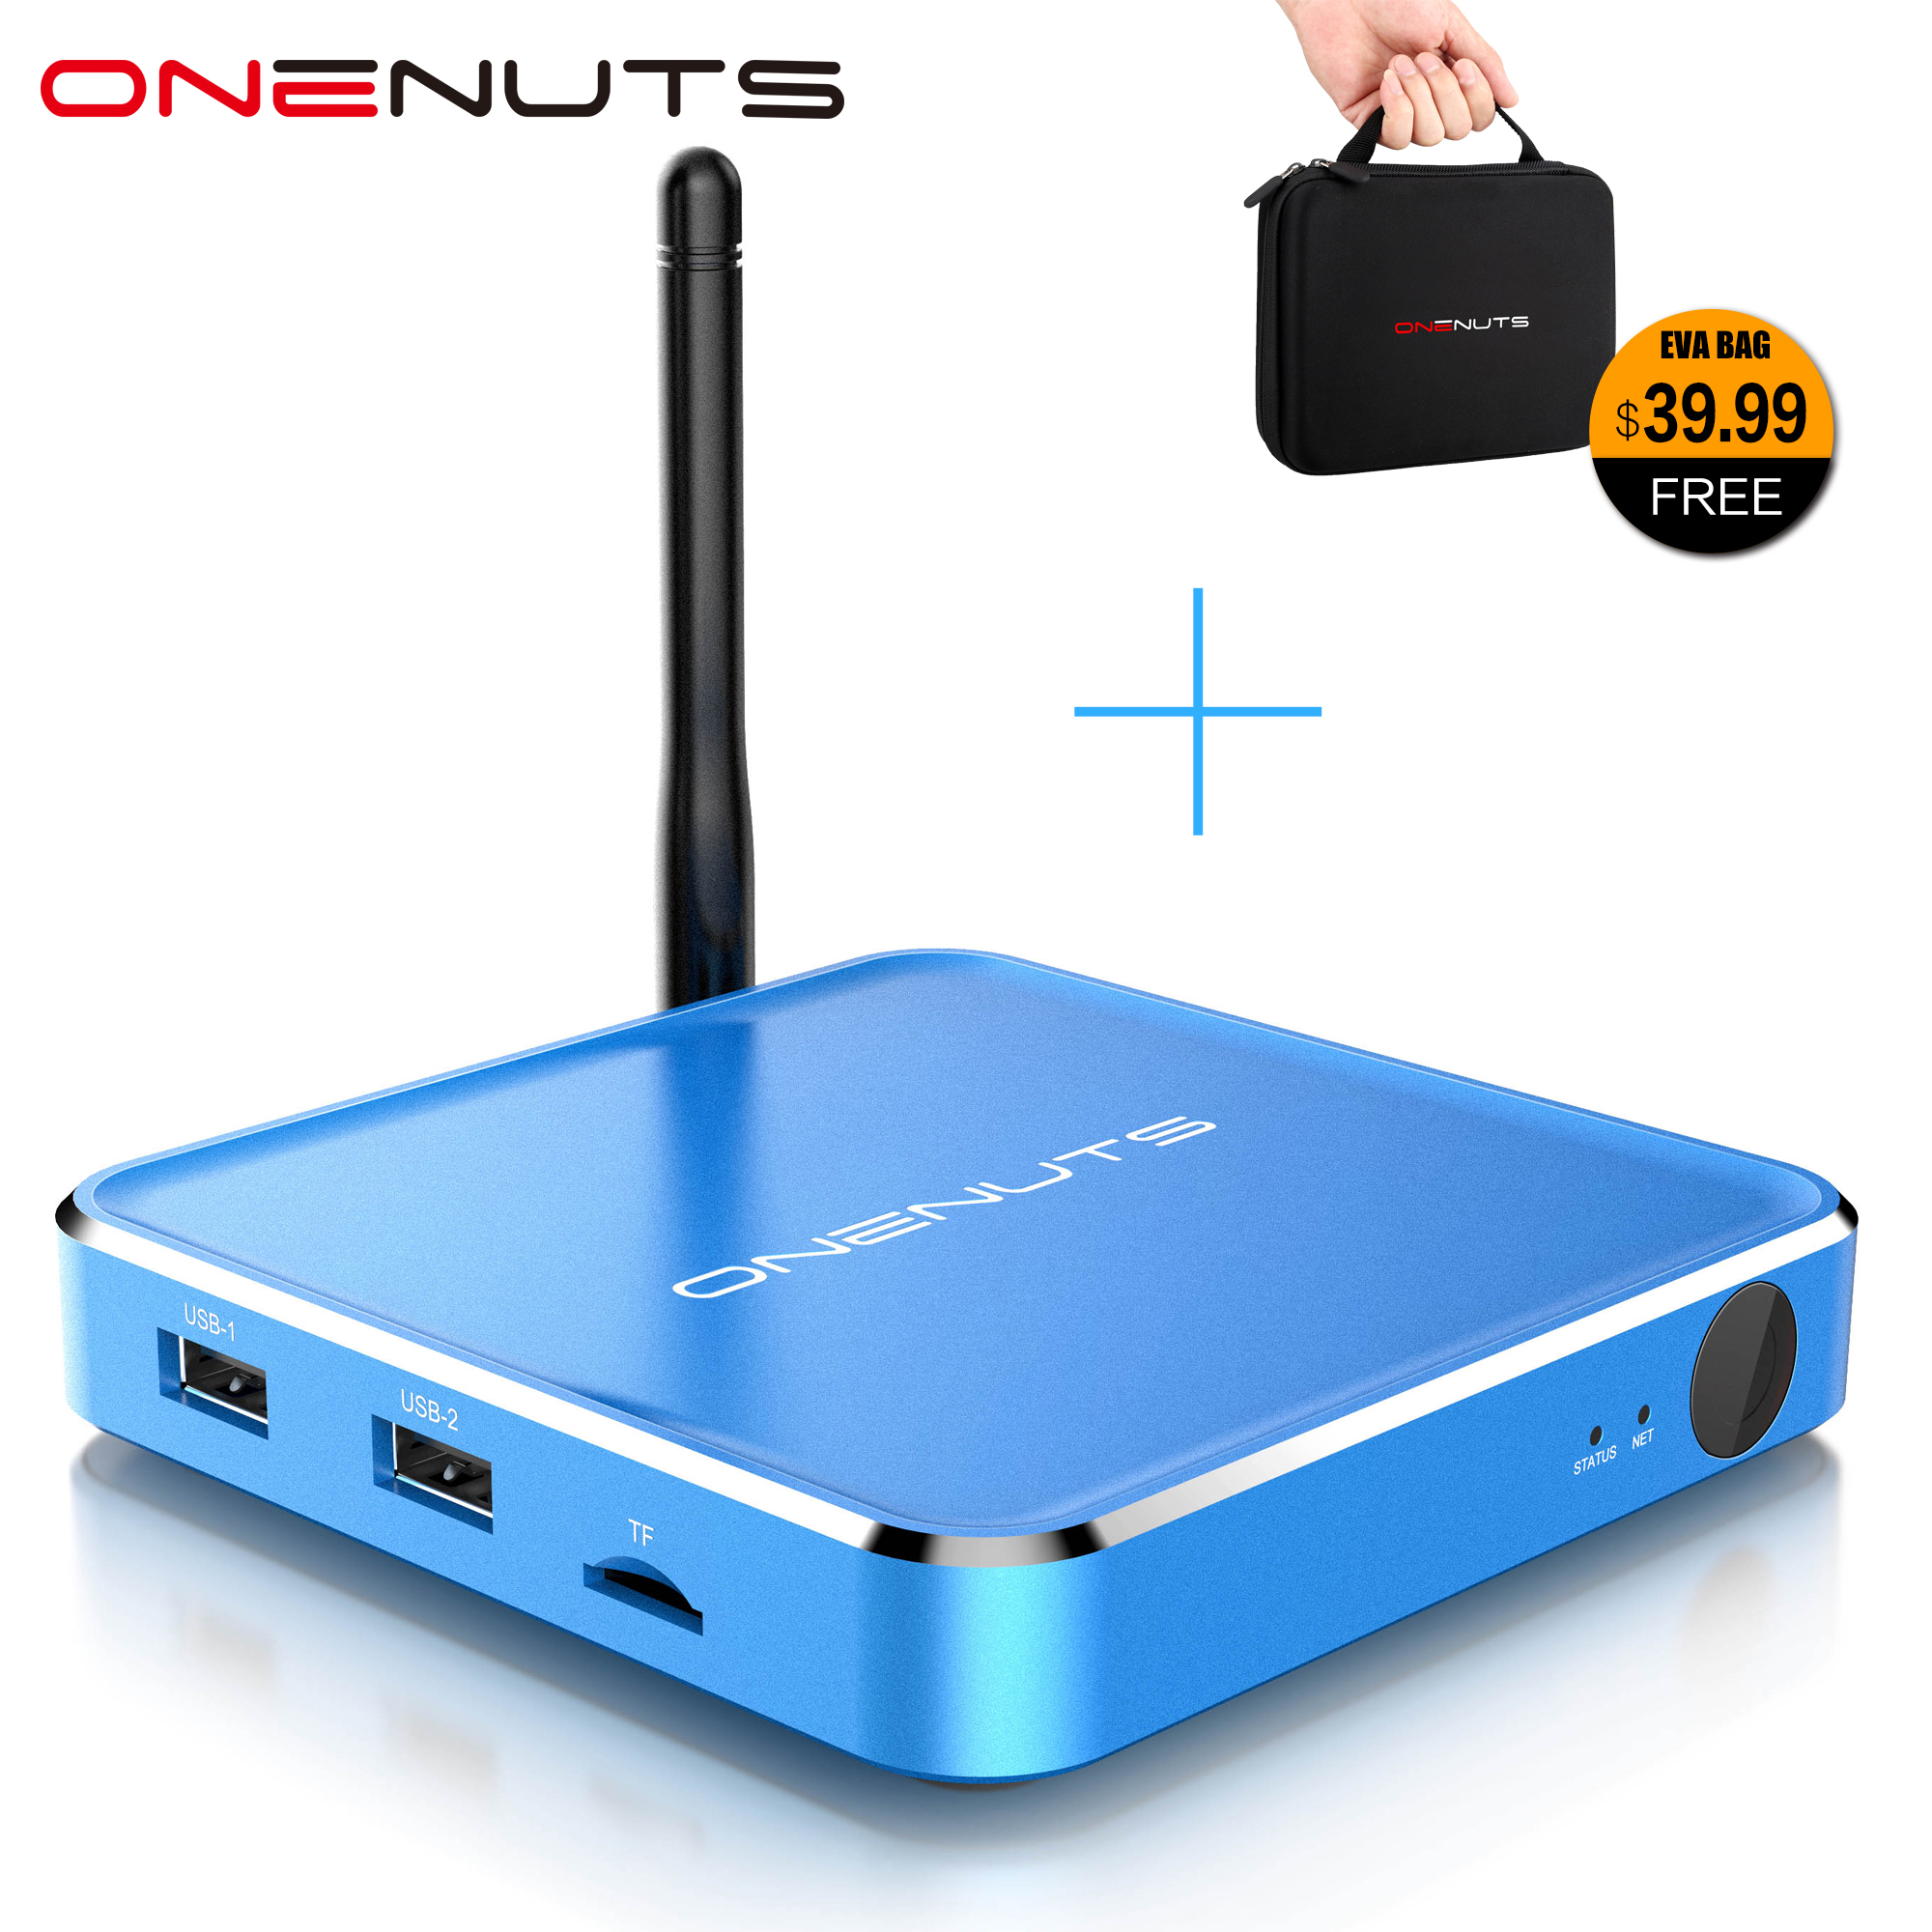 Android IPTV Box Manufacturer Android TV BOX with 3G/4G LTE WCDMA Wireless Module built-in